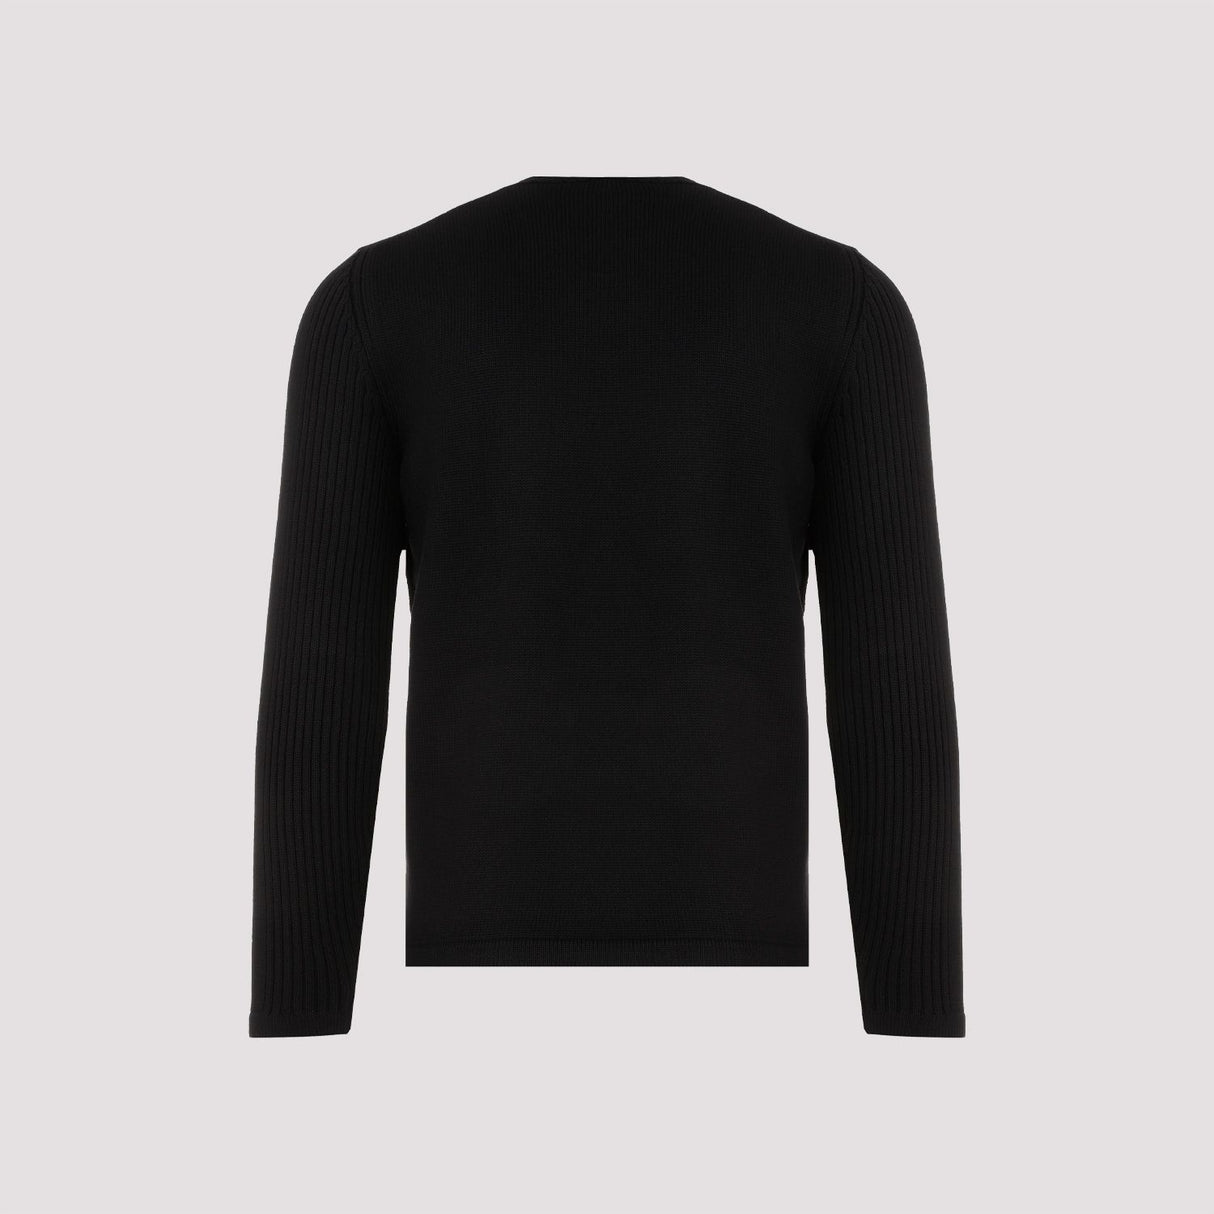 PRADA Luxurious Black Wool Sweater for Men - FW24 Collection